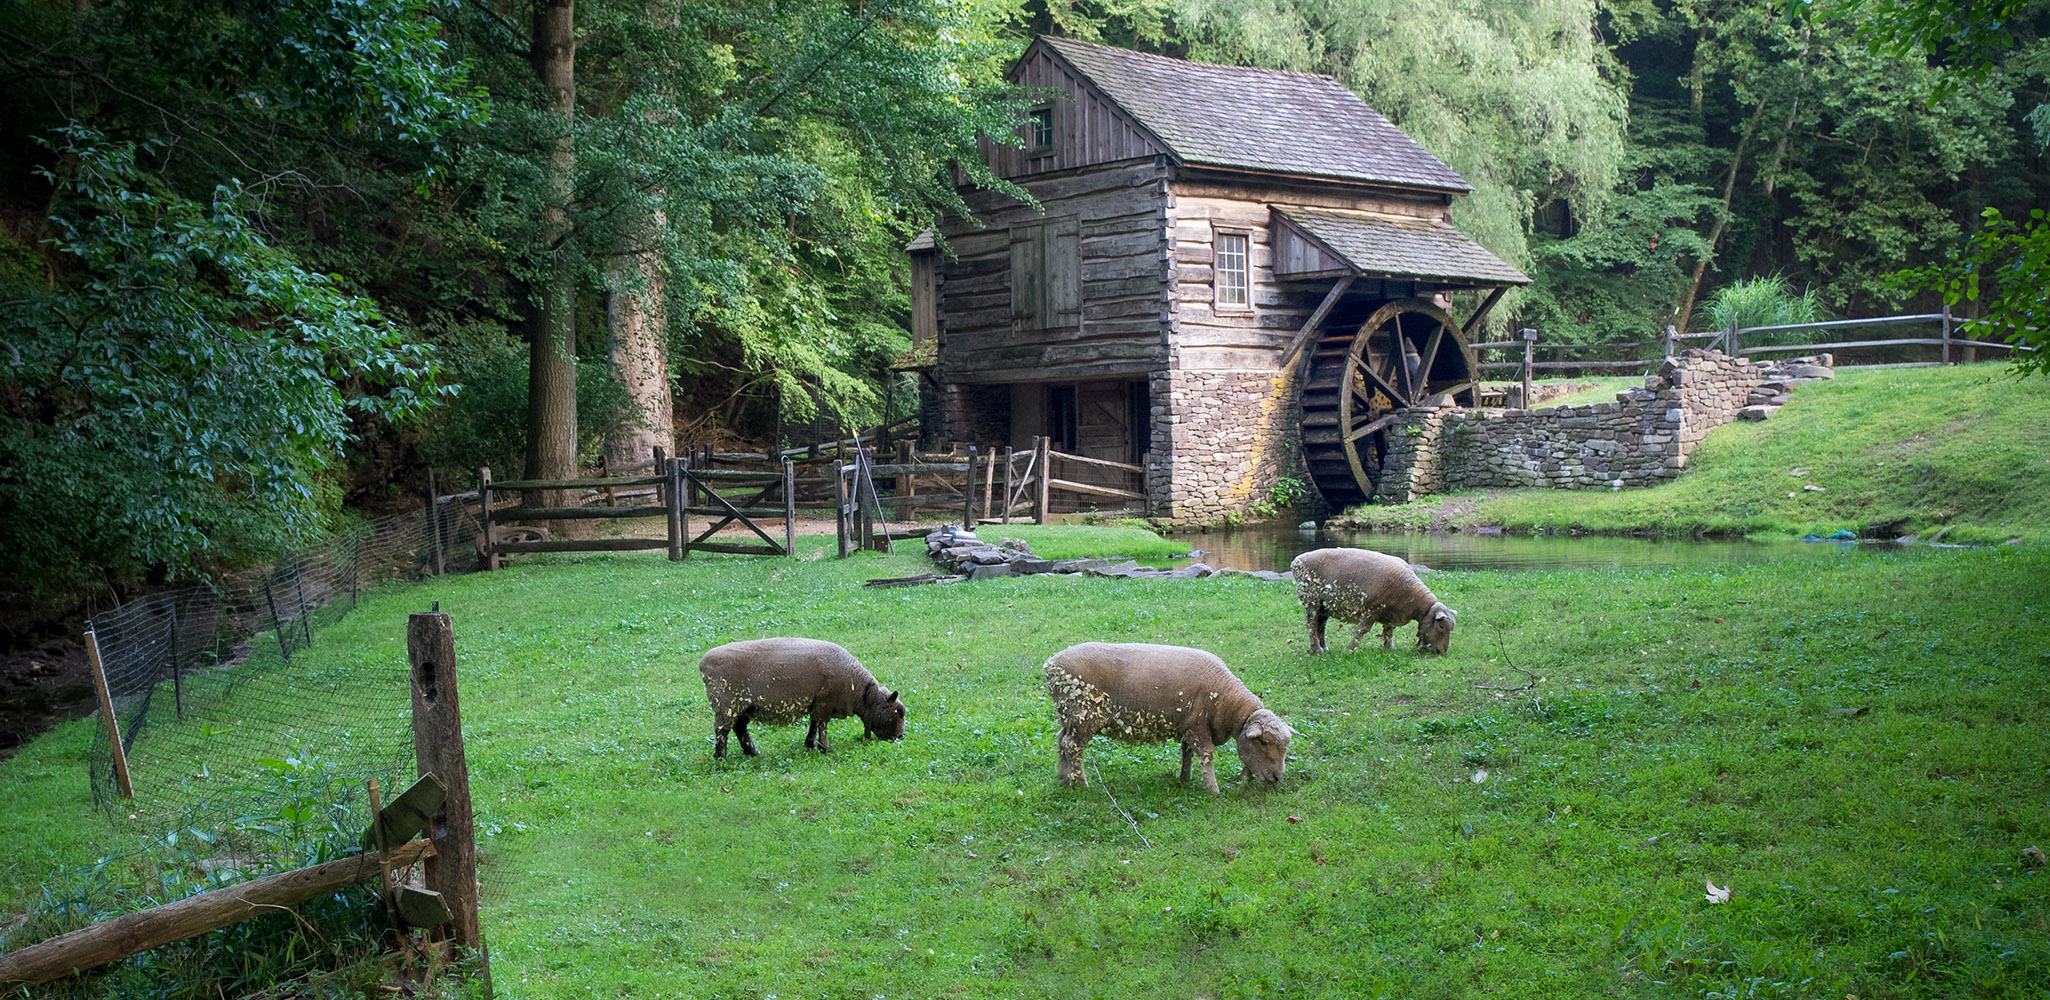 Sheep grazing in a lush green pasture on a old farmstead in historic Bucks County Pennsylvania with 18th c. log-built watermill.